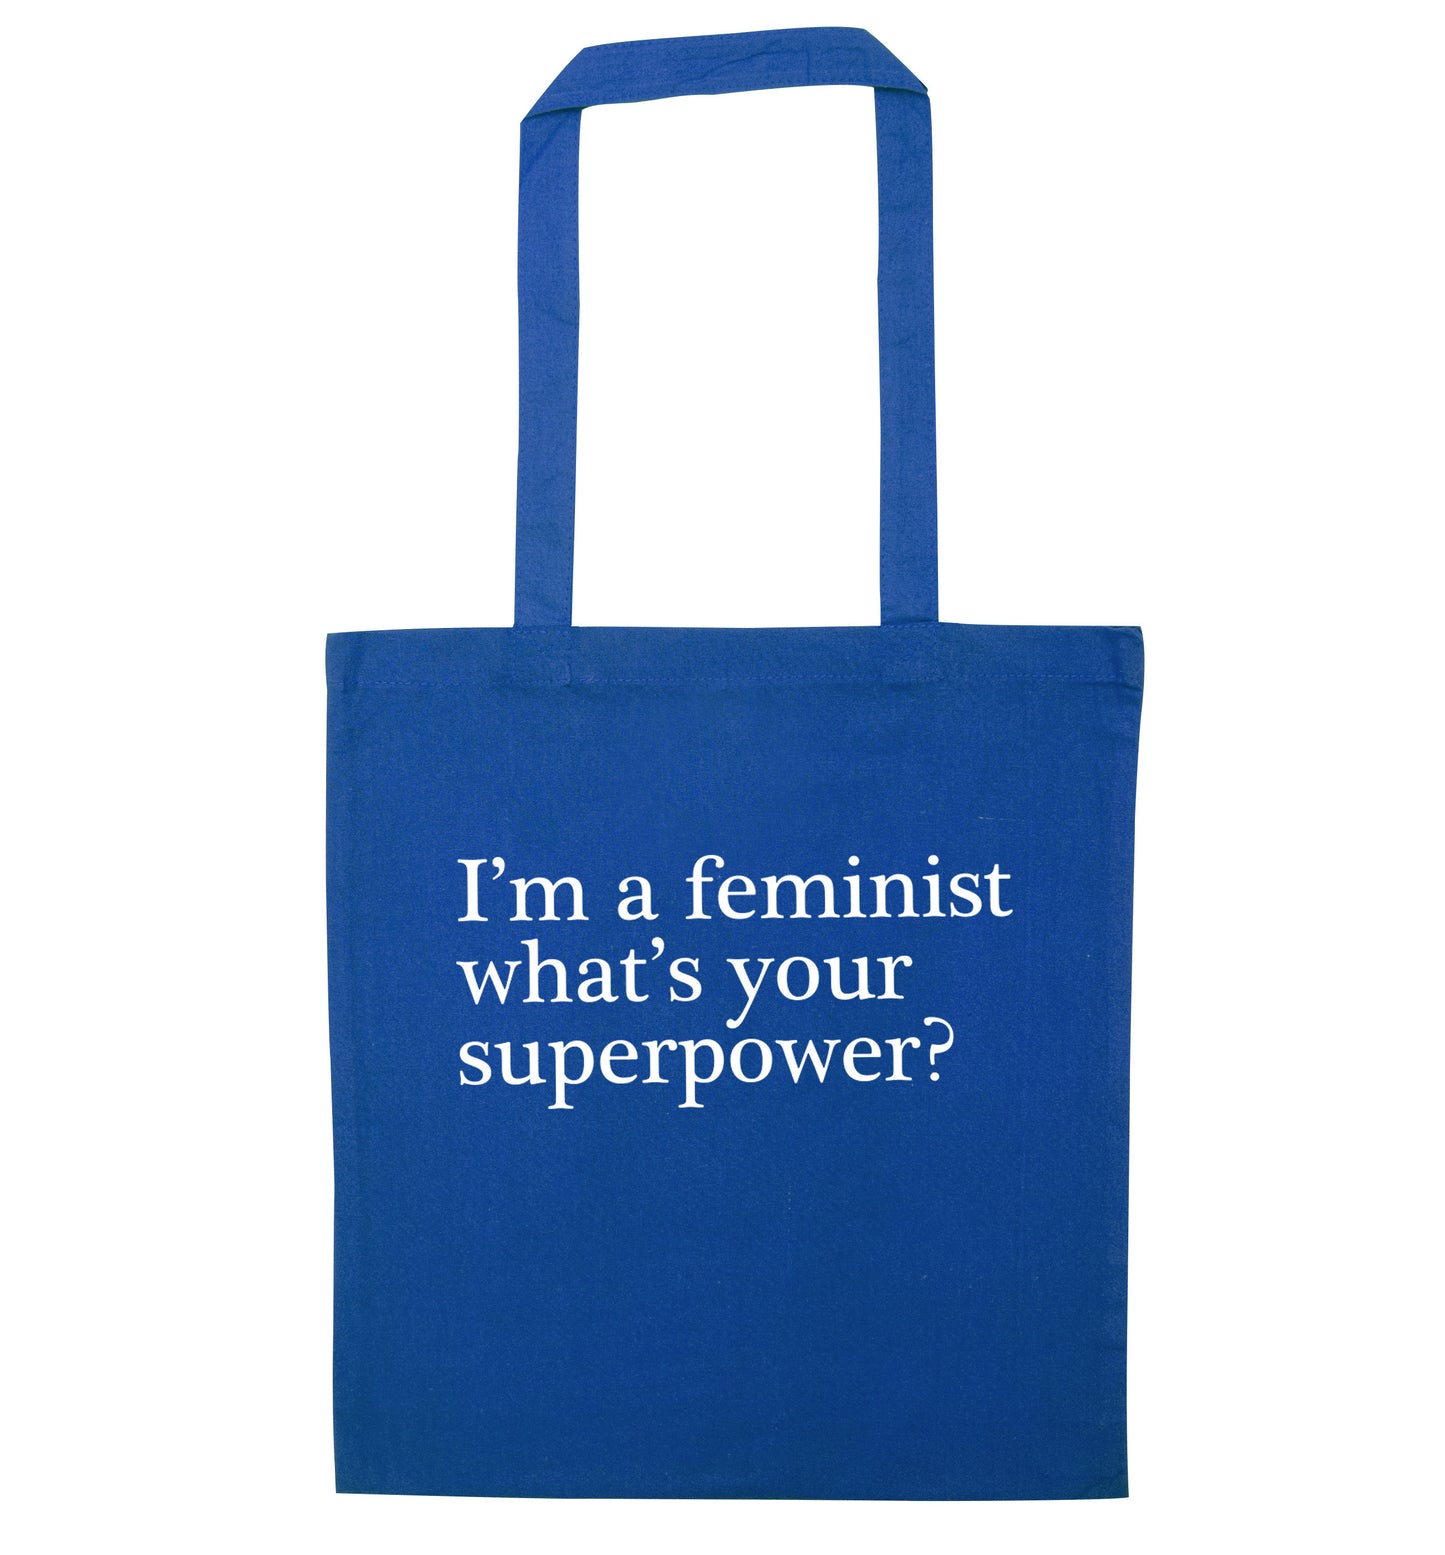 I'm a feminist what's your superpower? blue tote bag